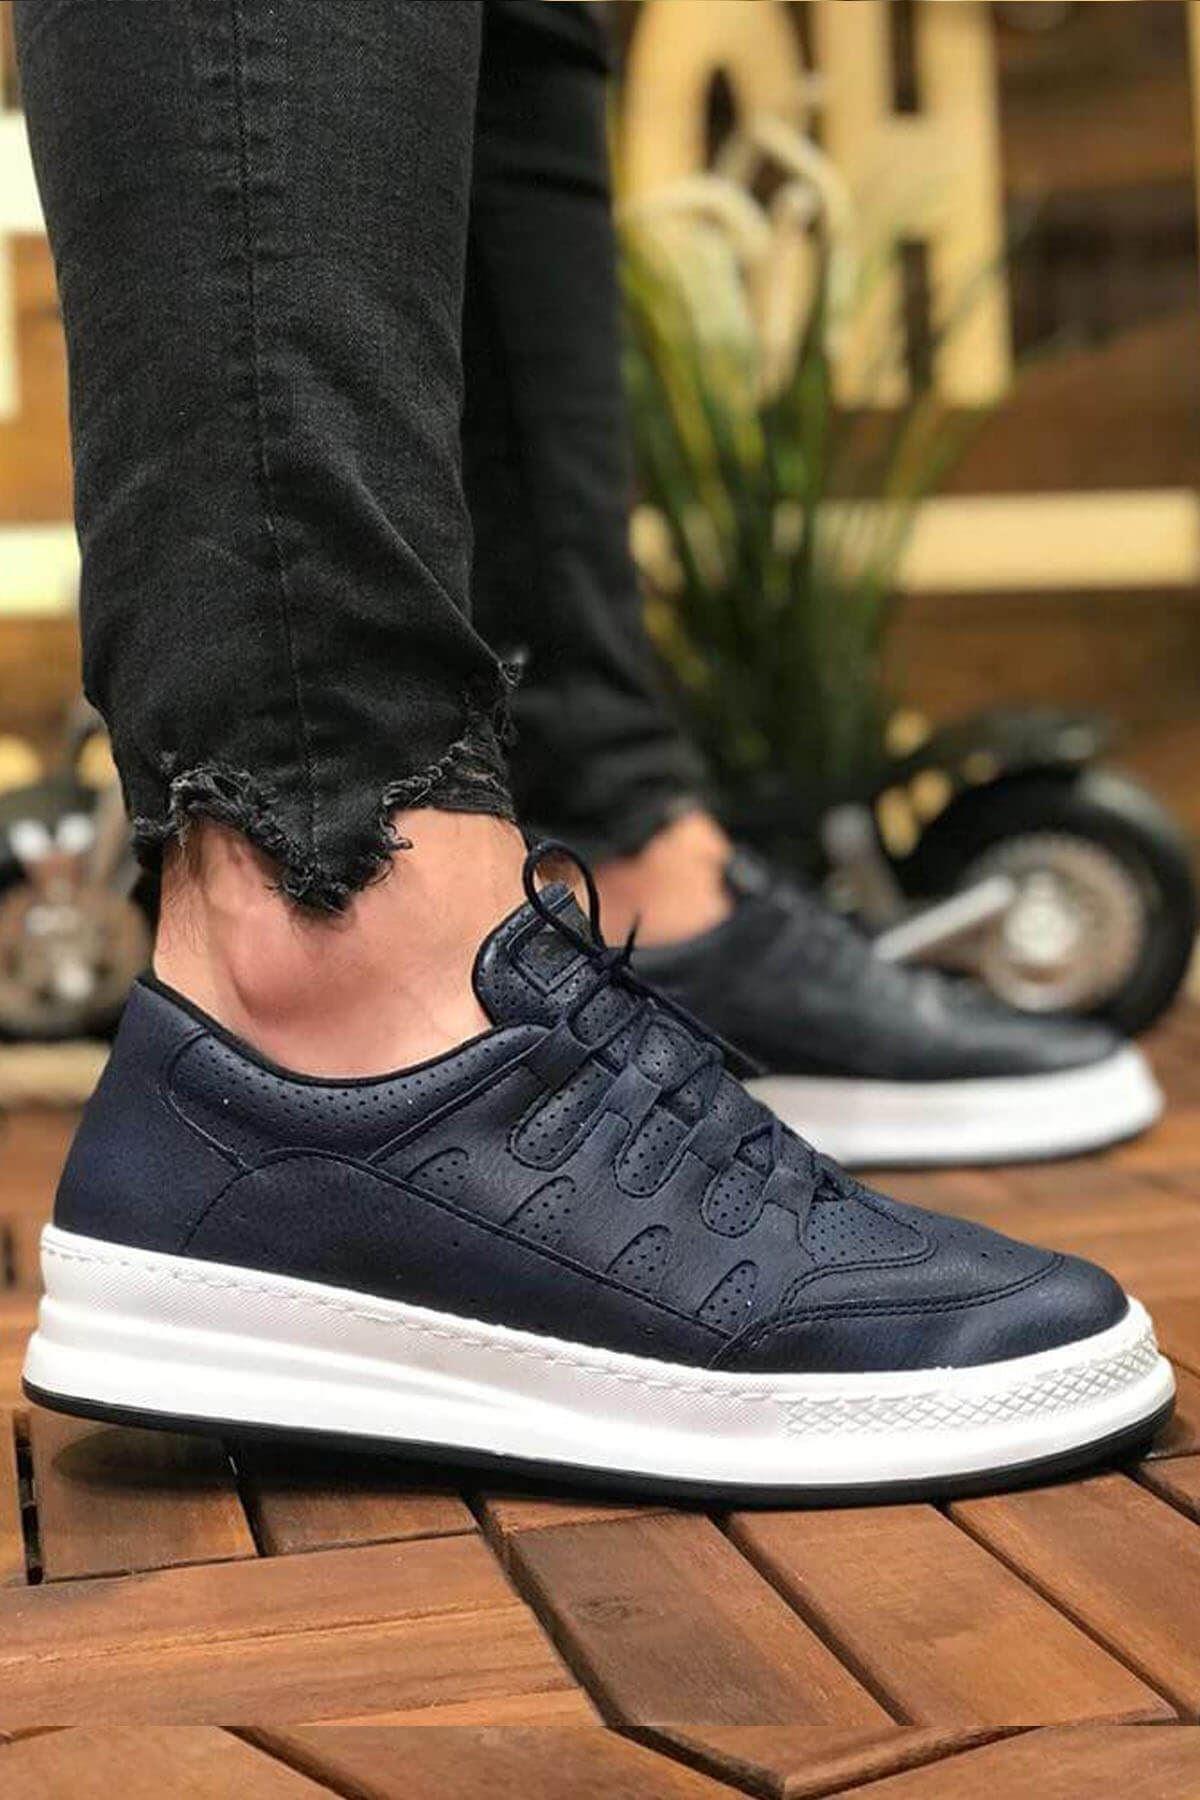 CH040 Men's Unisex Orthopedics Navy Blue-White Sole Casual Sneaker Sports Shoes - STREET MODE ™